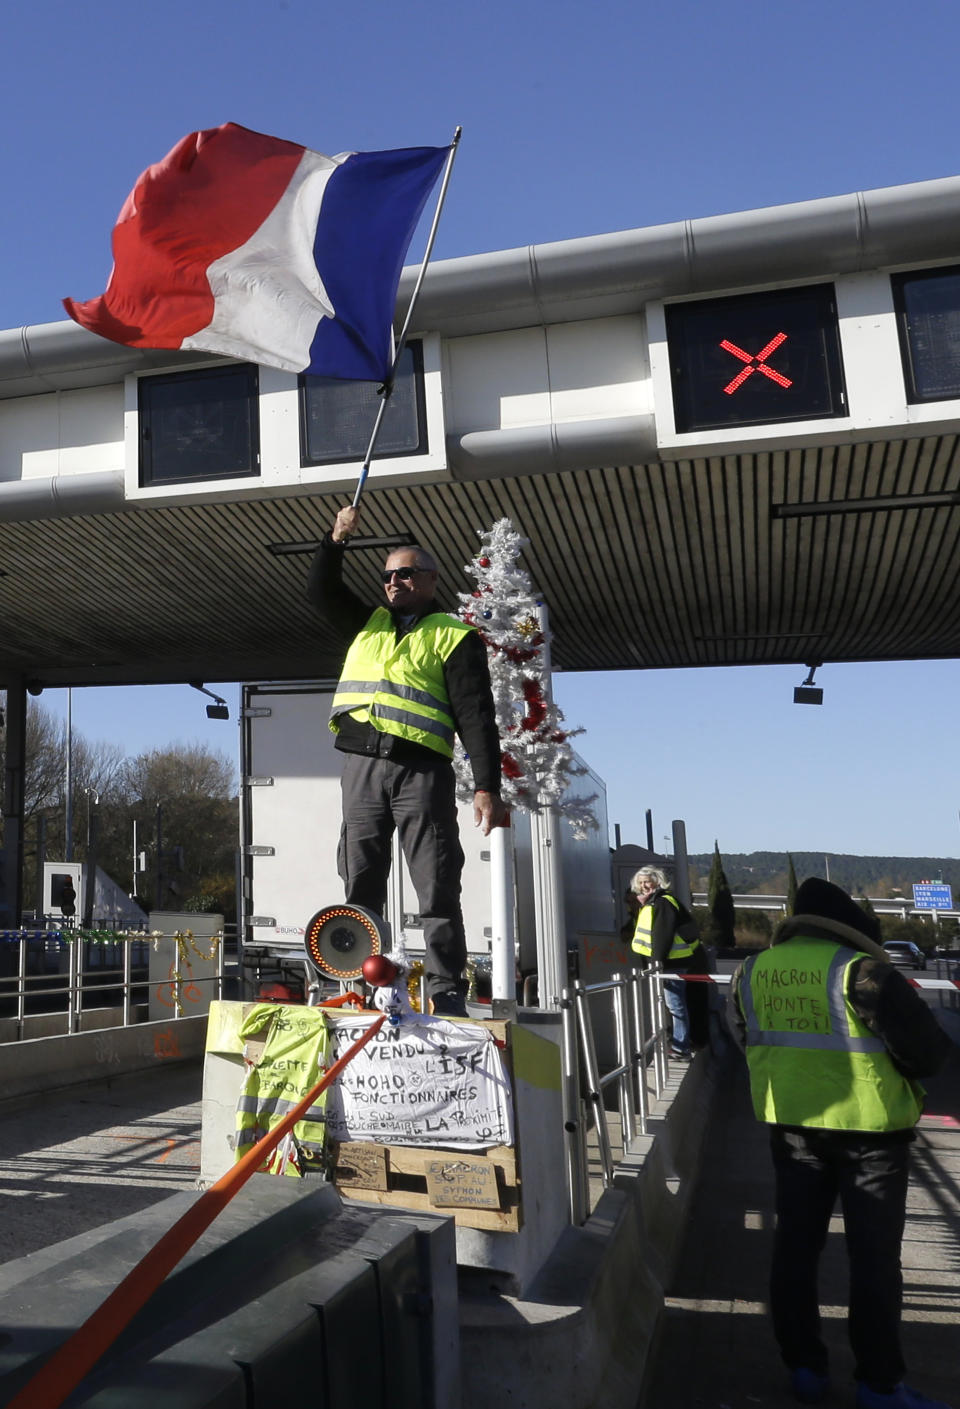 A demonstrators wearing a yellow vest waves a French flag as demonstrators open the toll gates on a motorway near Aix-en-Provence, southeastern France, Tuesday, Dec. 4, 2018. French Prime Minister Edouard Philippe announced a suspension of fuel tax hikes Tuesday, a major U-turn in an effort to appease a protest movement that has radicalized and plunged Paris into chaos last weekend. (AP Photo/Claude Paris)